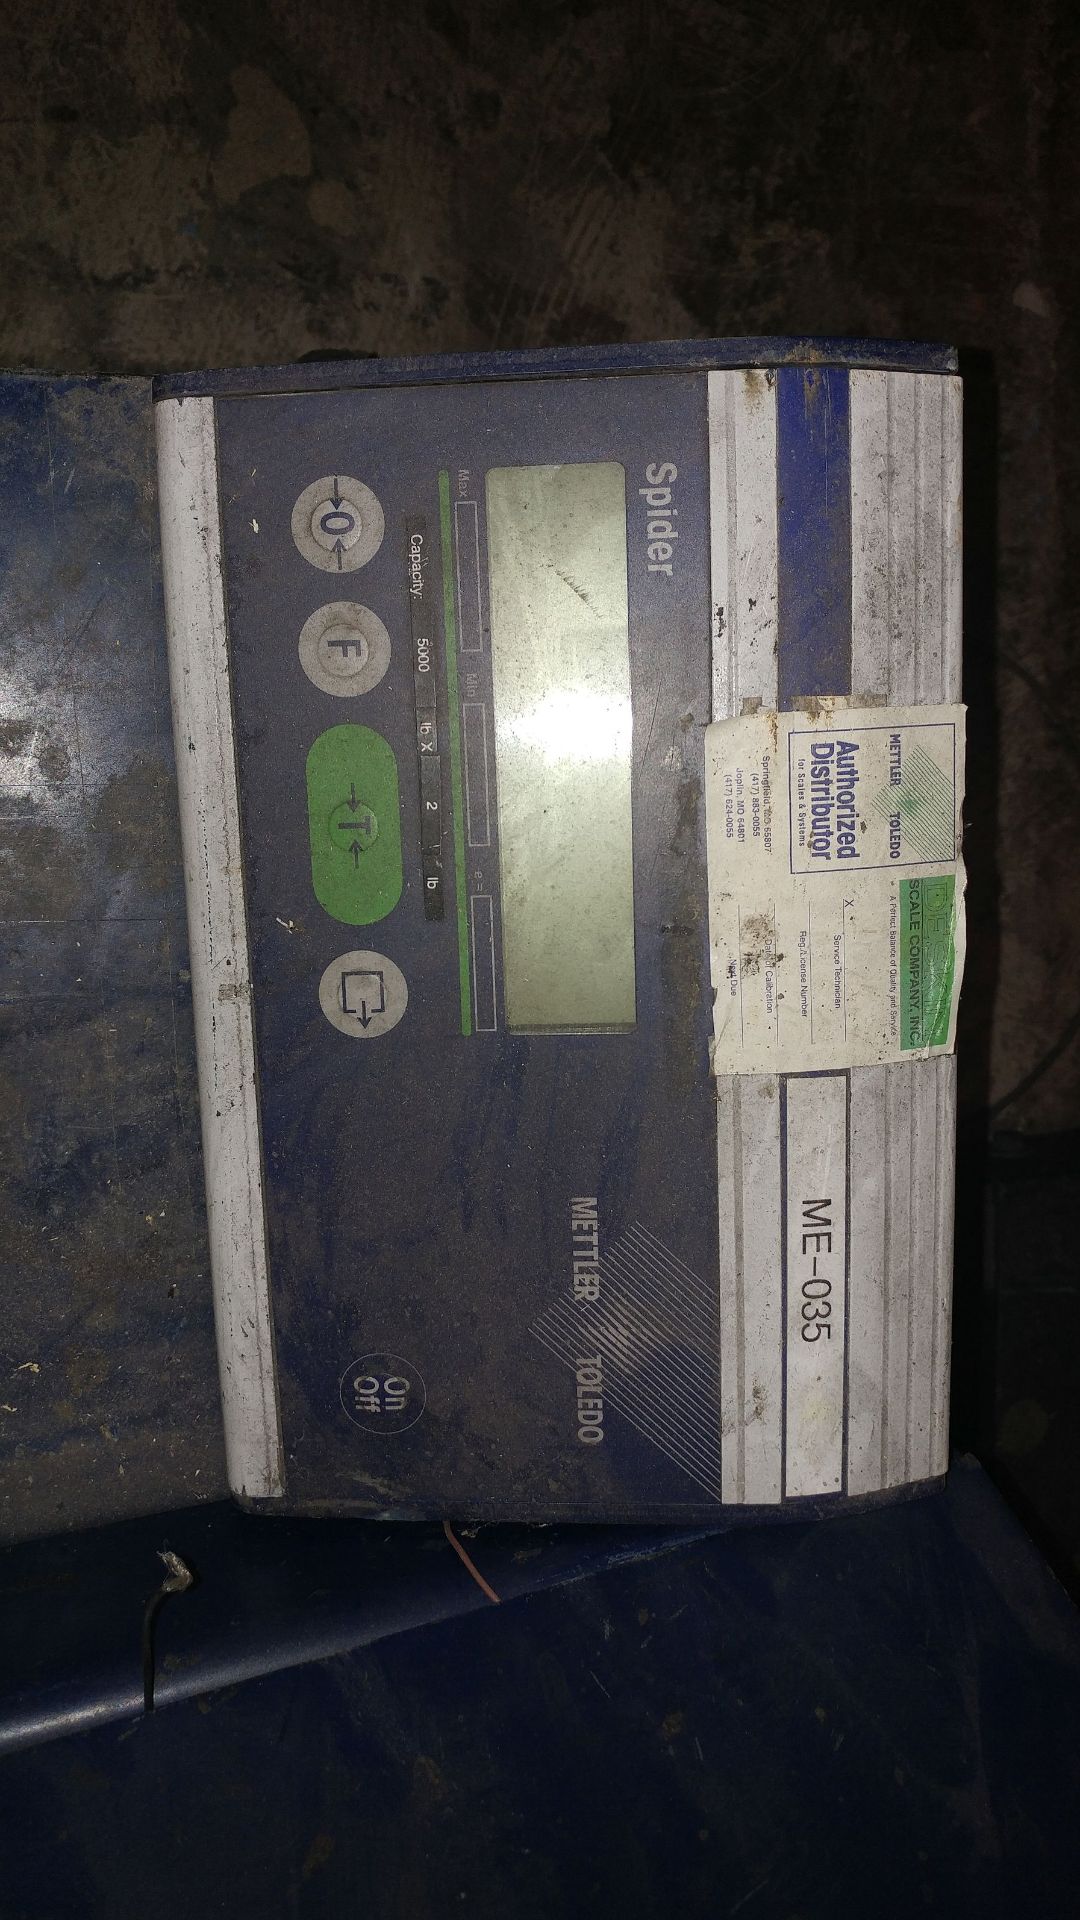 Lantech Q-300 pallet wrapper / Stretch wrapper with scale ***See Auctioneers Note*** - Image 8 of 11